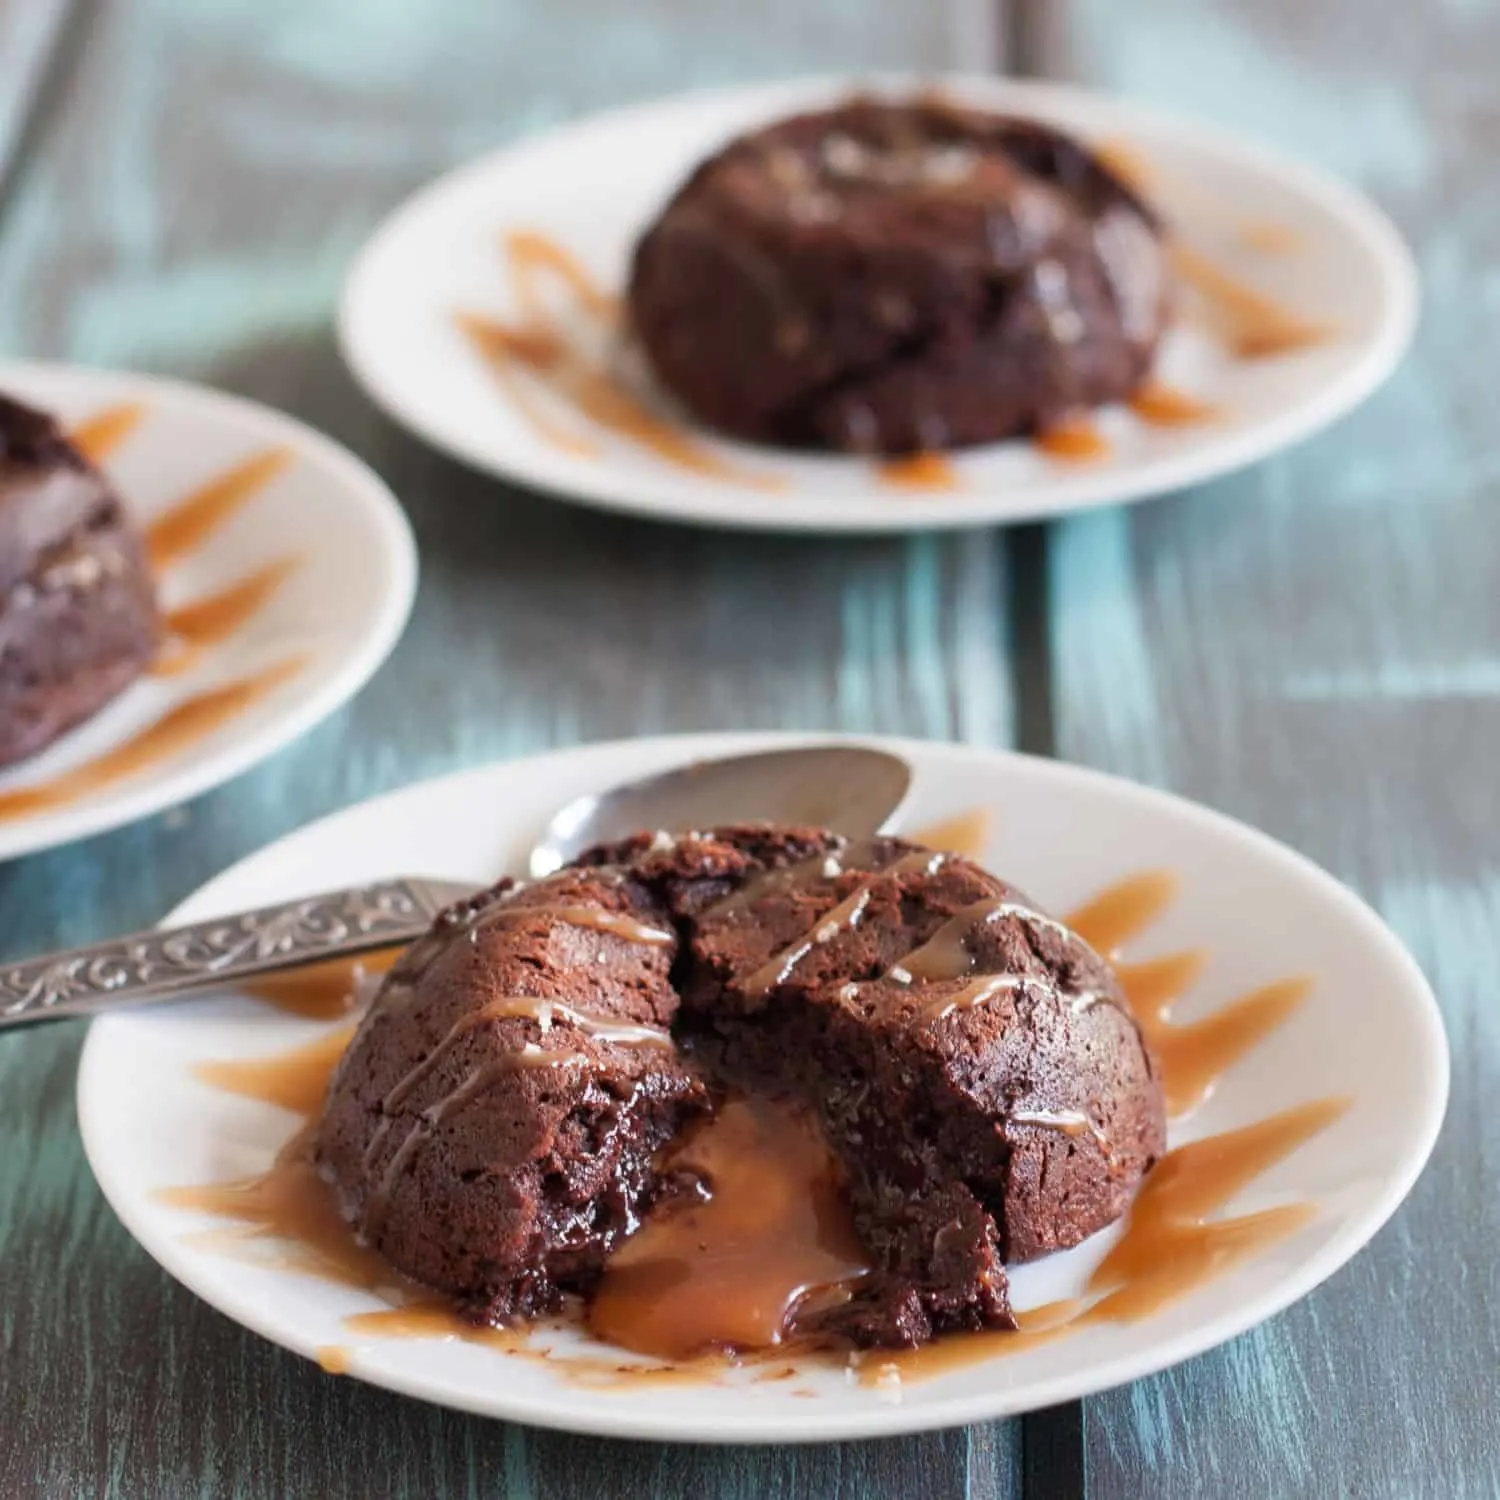 Make salted caramel lava cakes at home with this easy recipe! A delicious Valentine's Day dessert idea brought to you by GoodieGodmother.com